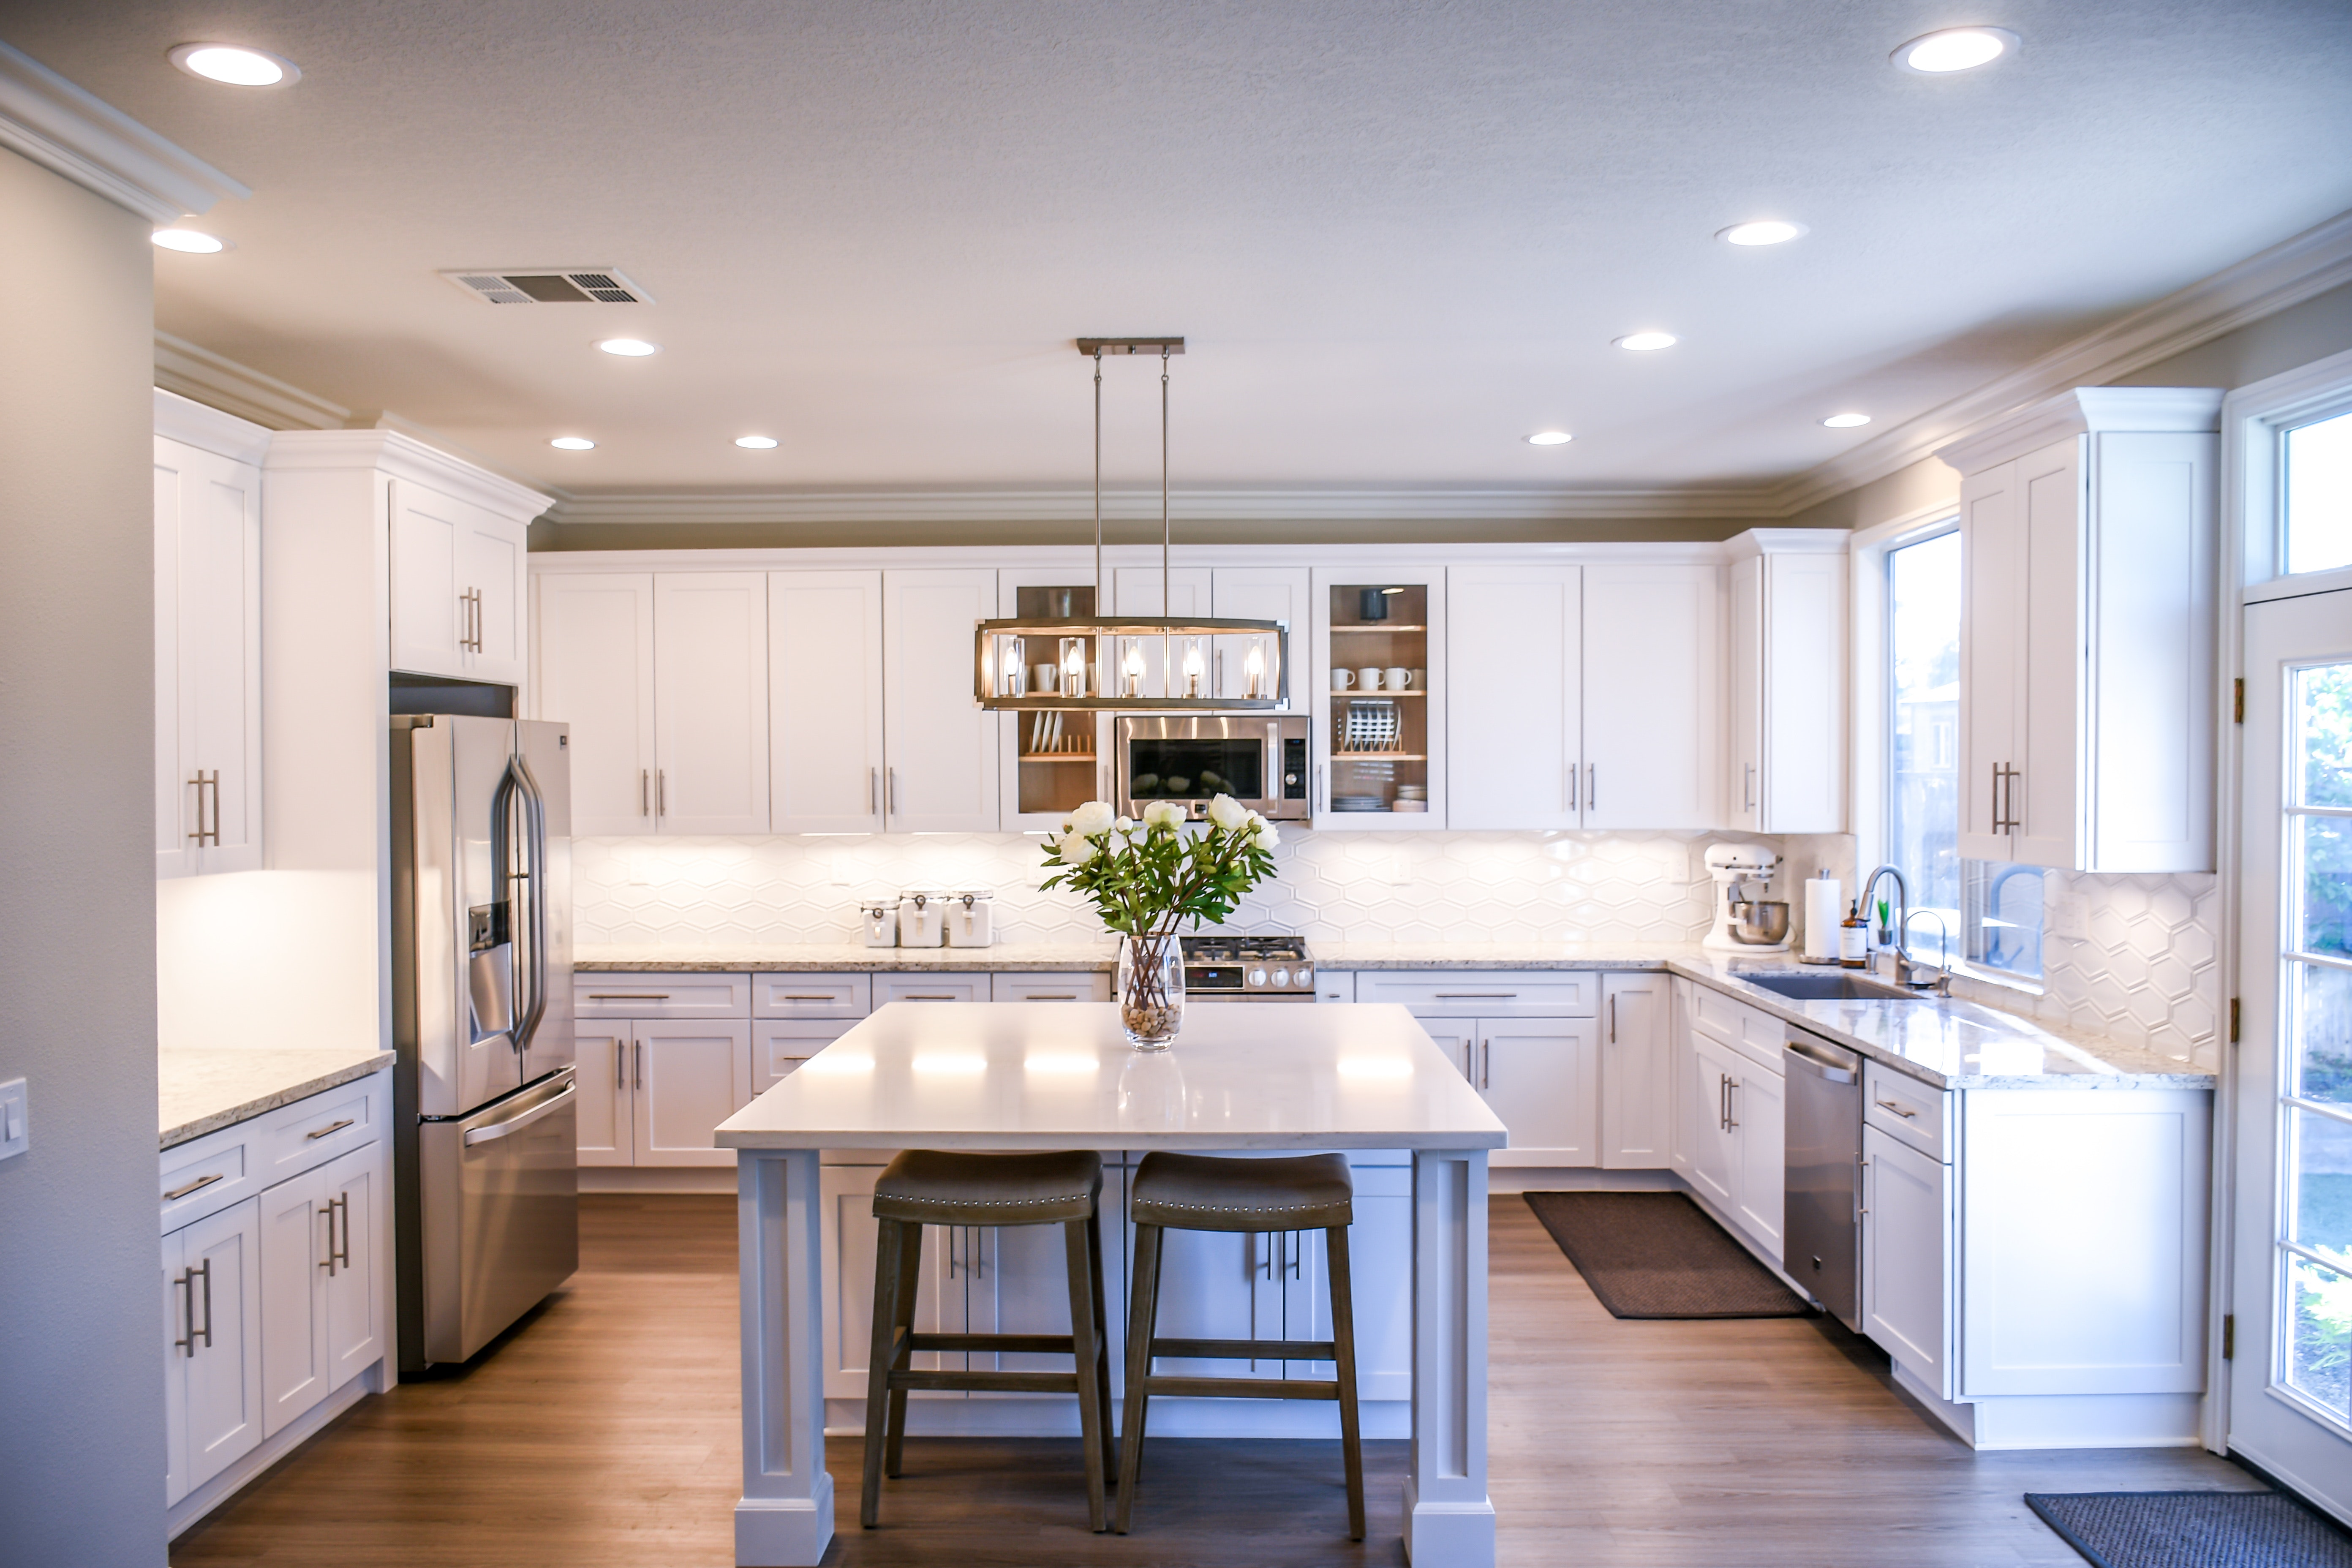 Cabinet lighting in your kitchen is both practical and fabulous!